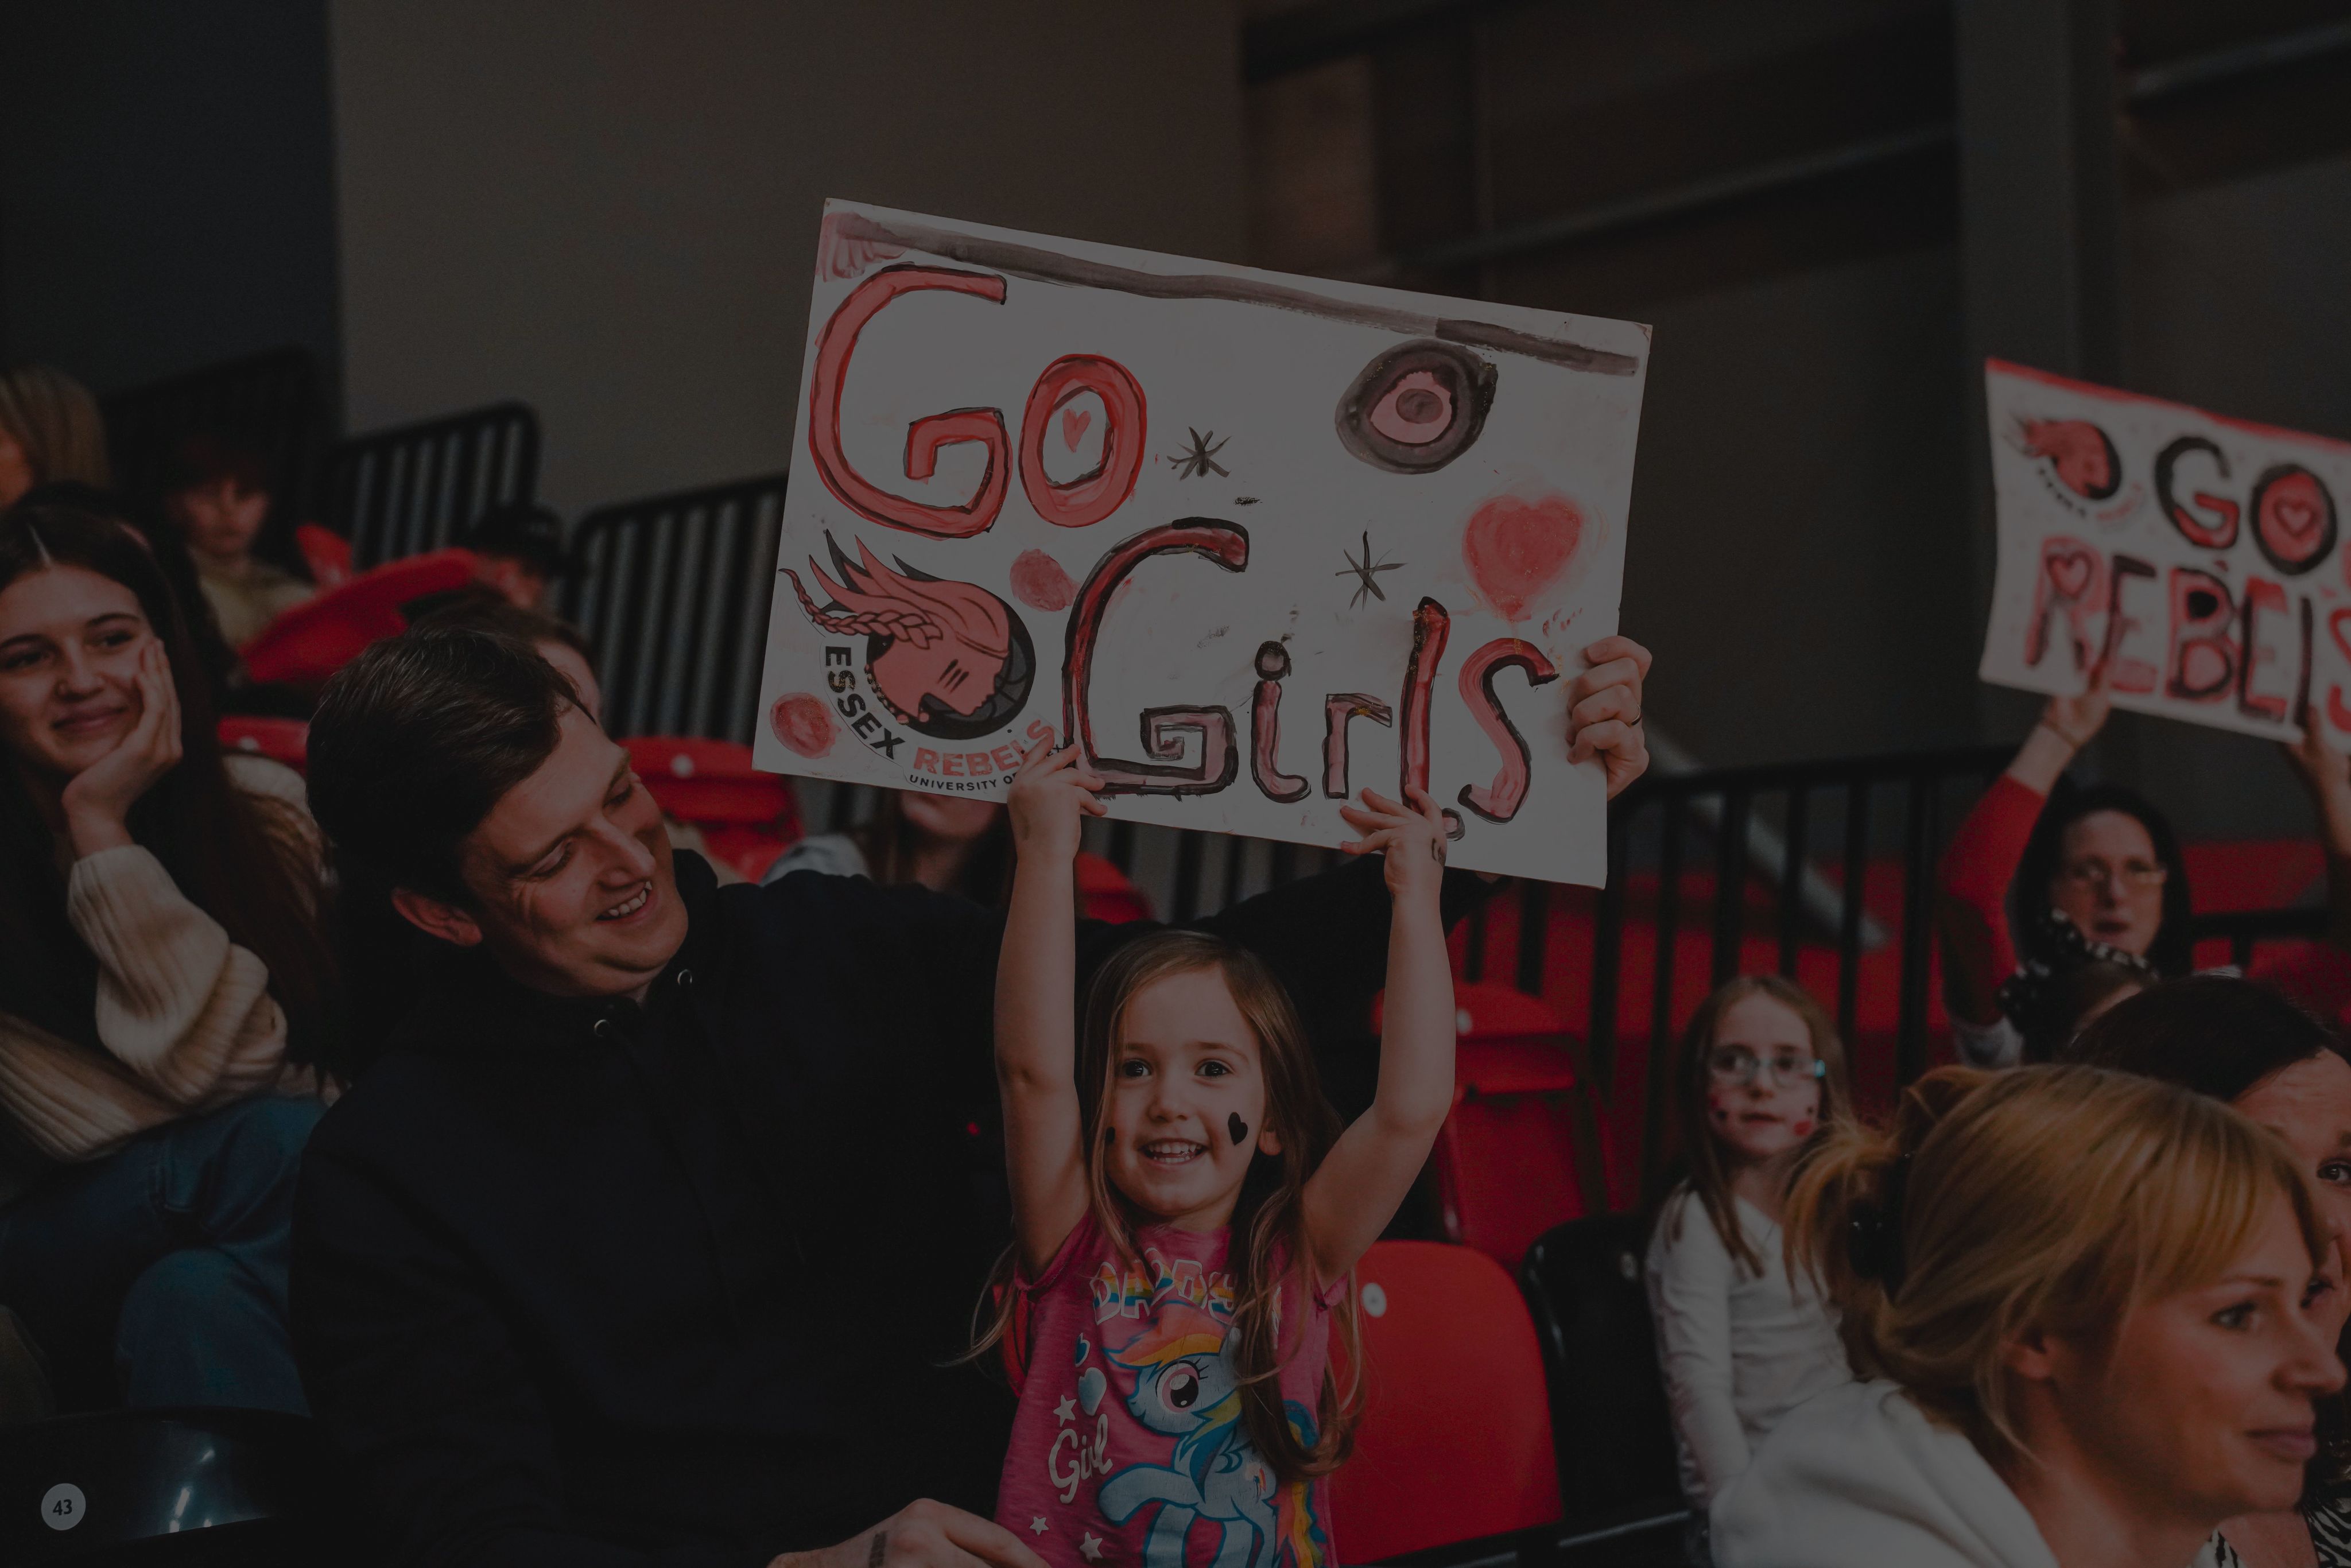 A young Essex Rebels fan holding a 'Go girls' banner.